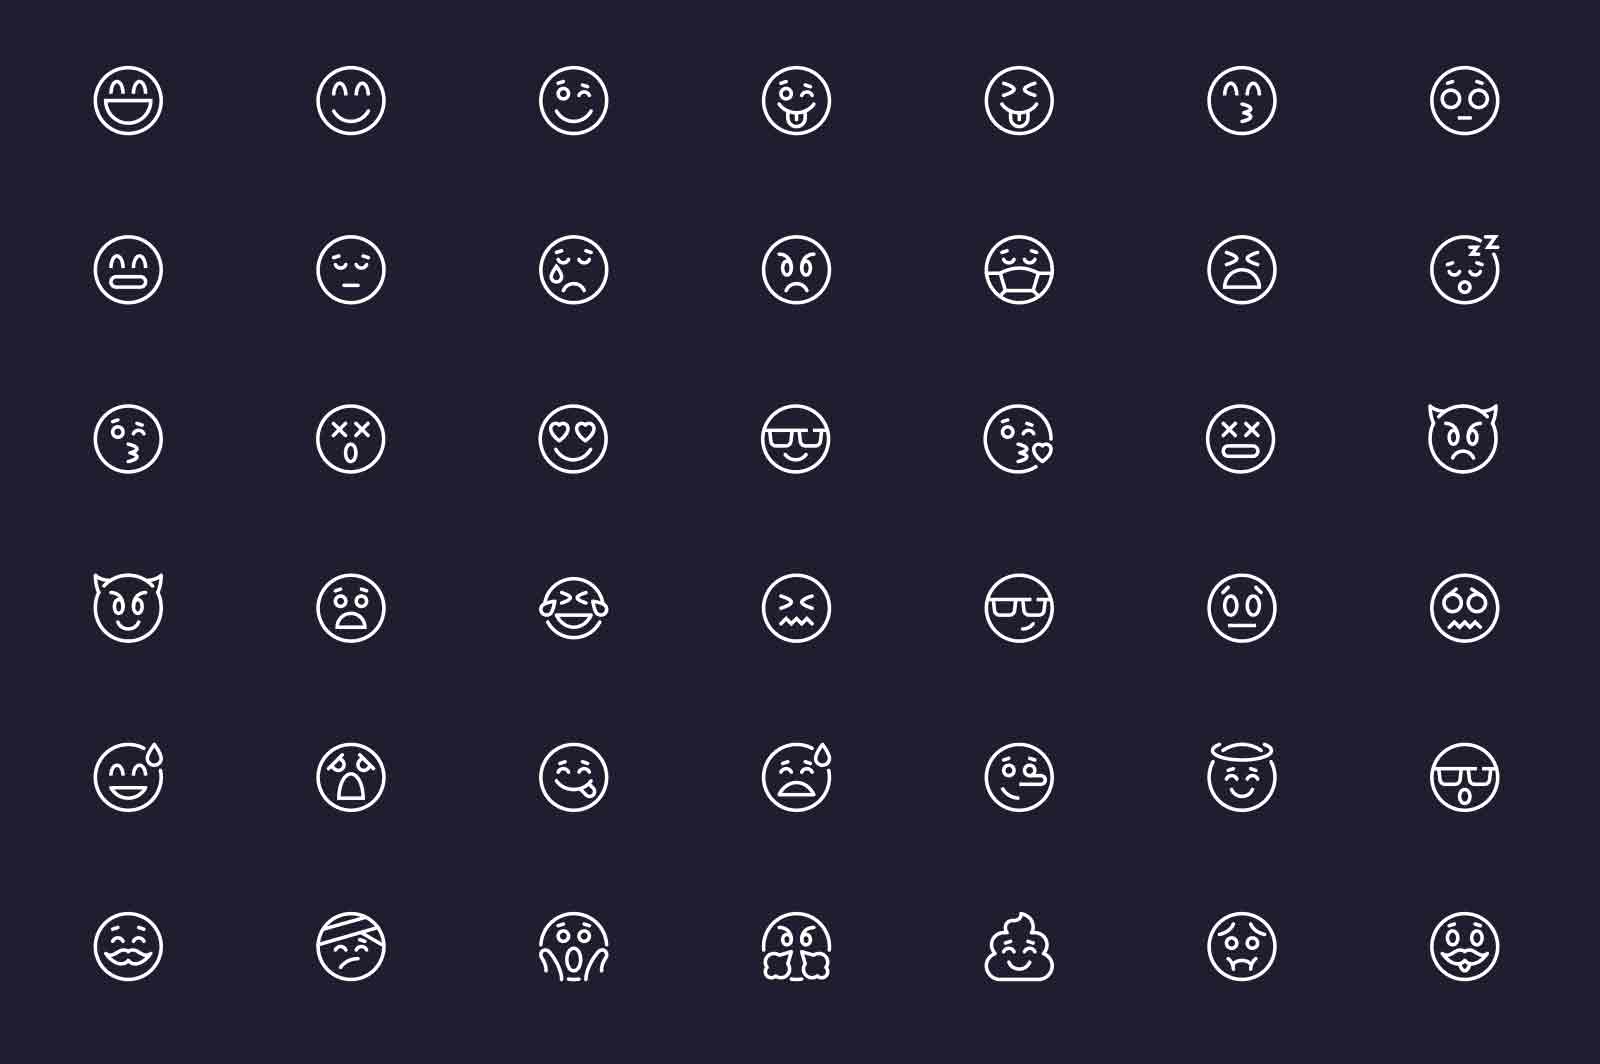 Emojis with emotions icons set vector illustration. Way to express emotion in texting line icon. Dark background